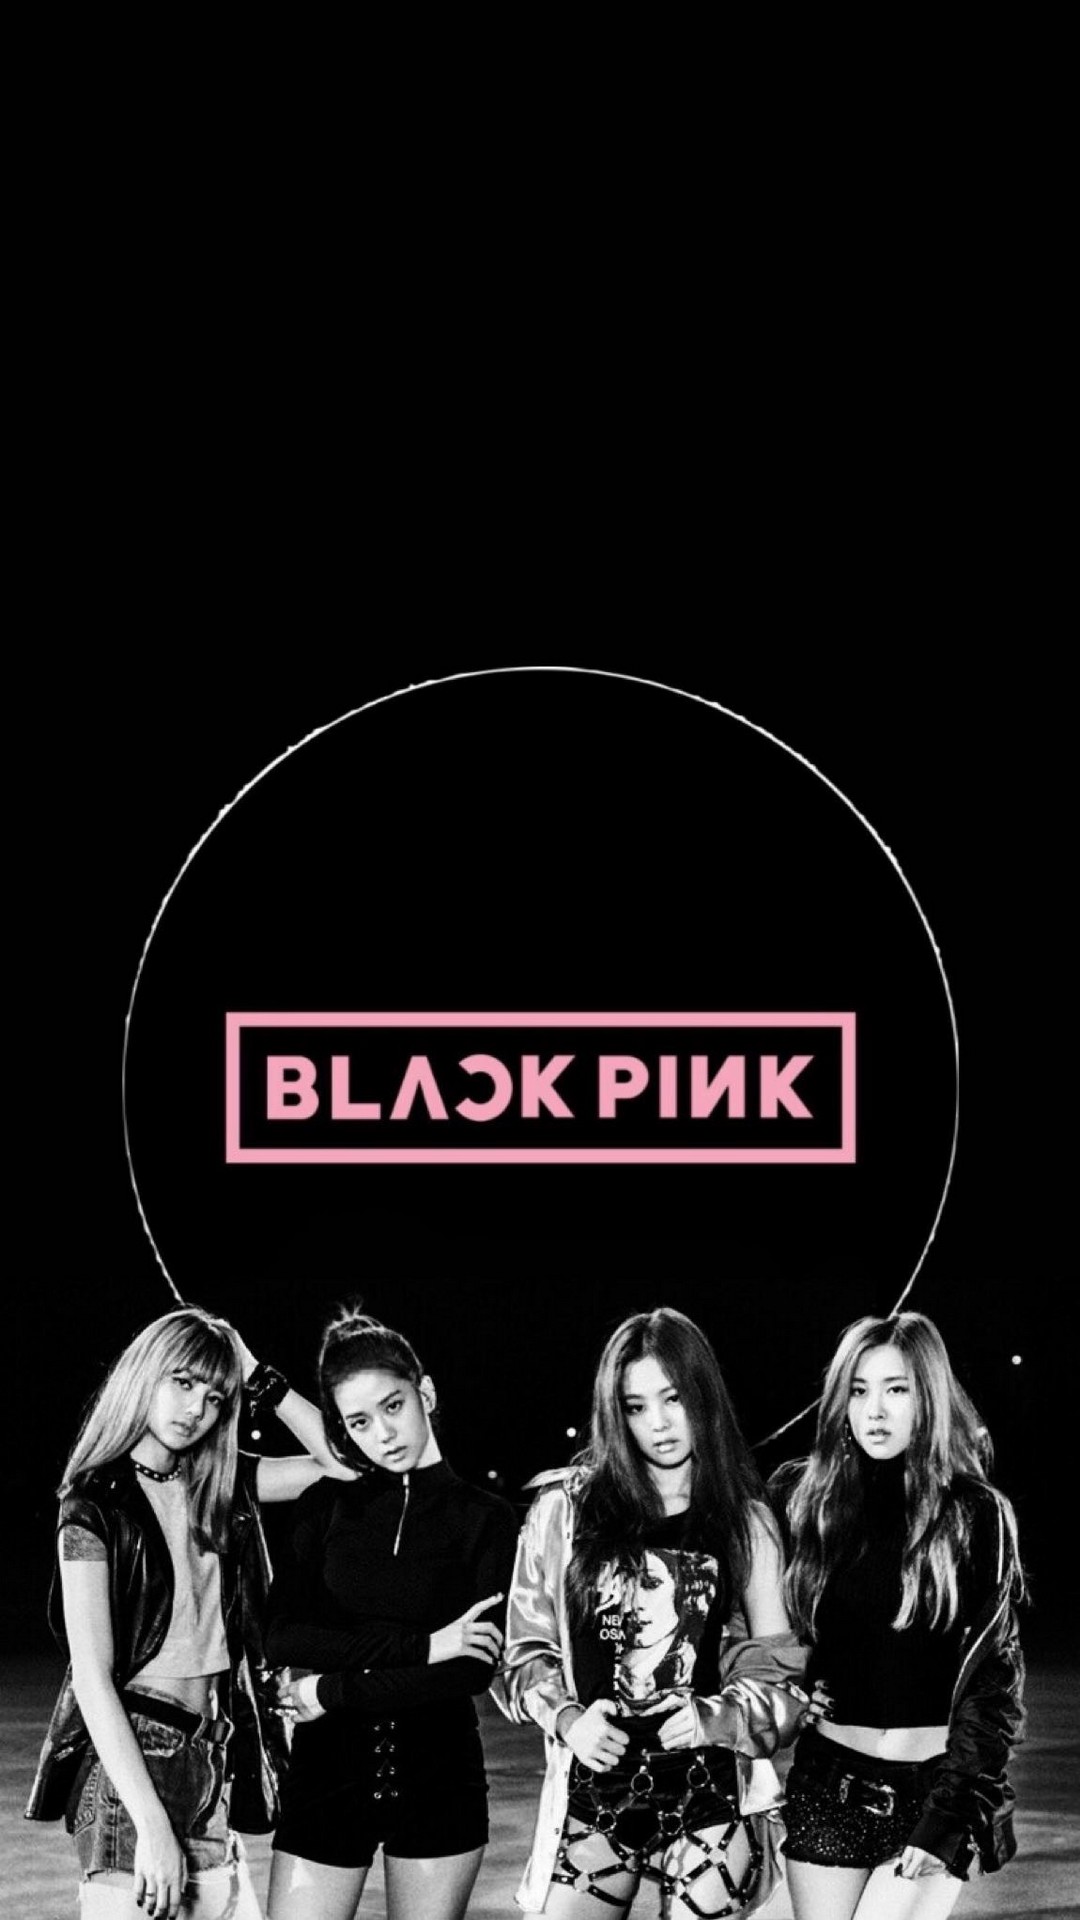 Blackpink Wallpaper for iPhone With high-resolution 1080X1920 pixel. You can use this wallpaper for your iPhone 5, 6, 7, 8, X, XS, XR backgrounds, Mobile Screensaver, or iPad Lock Screen